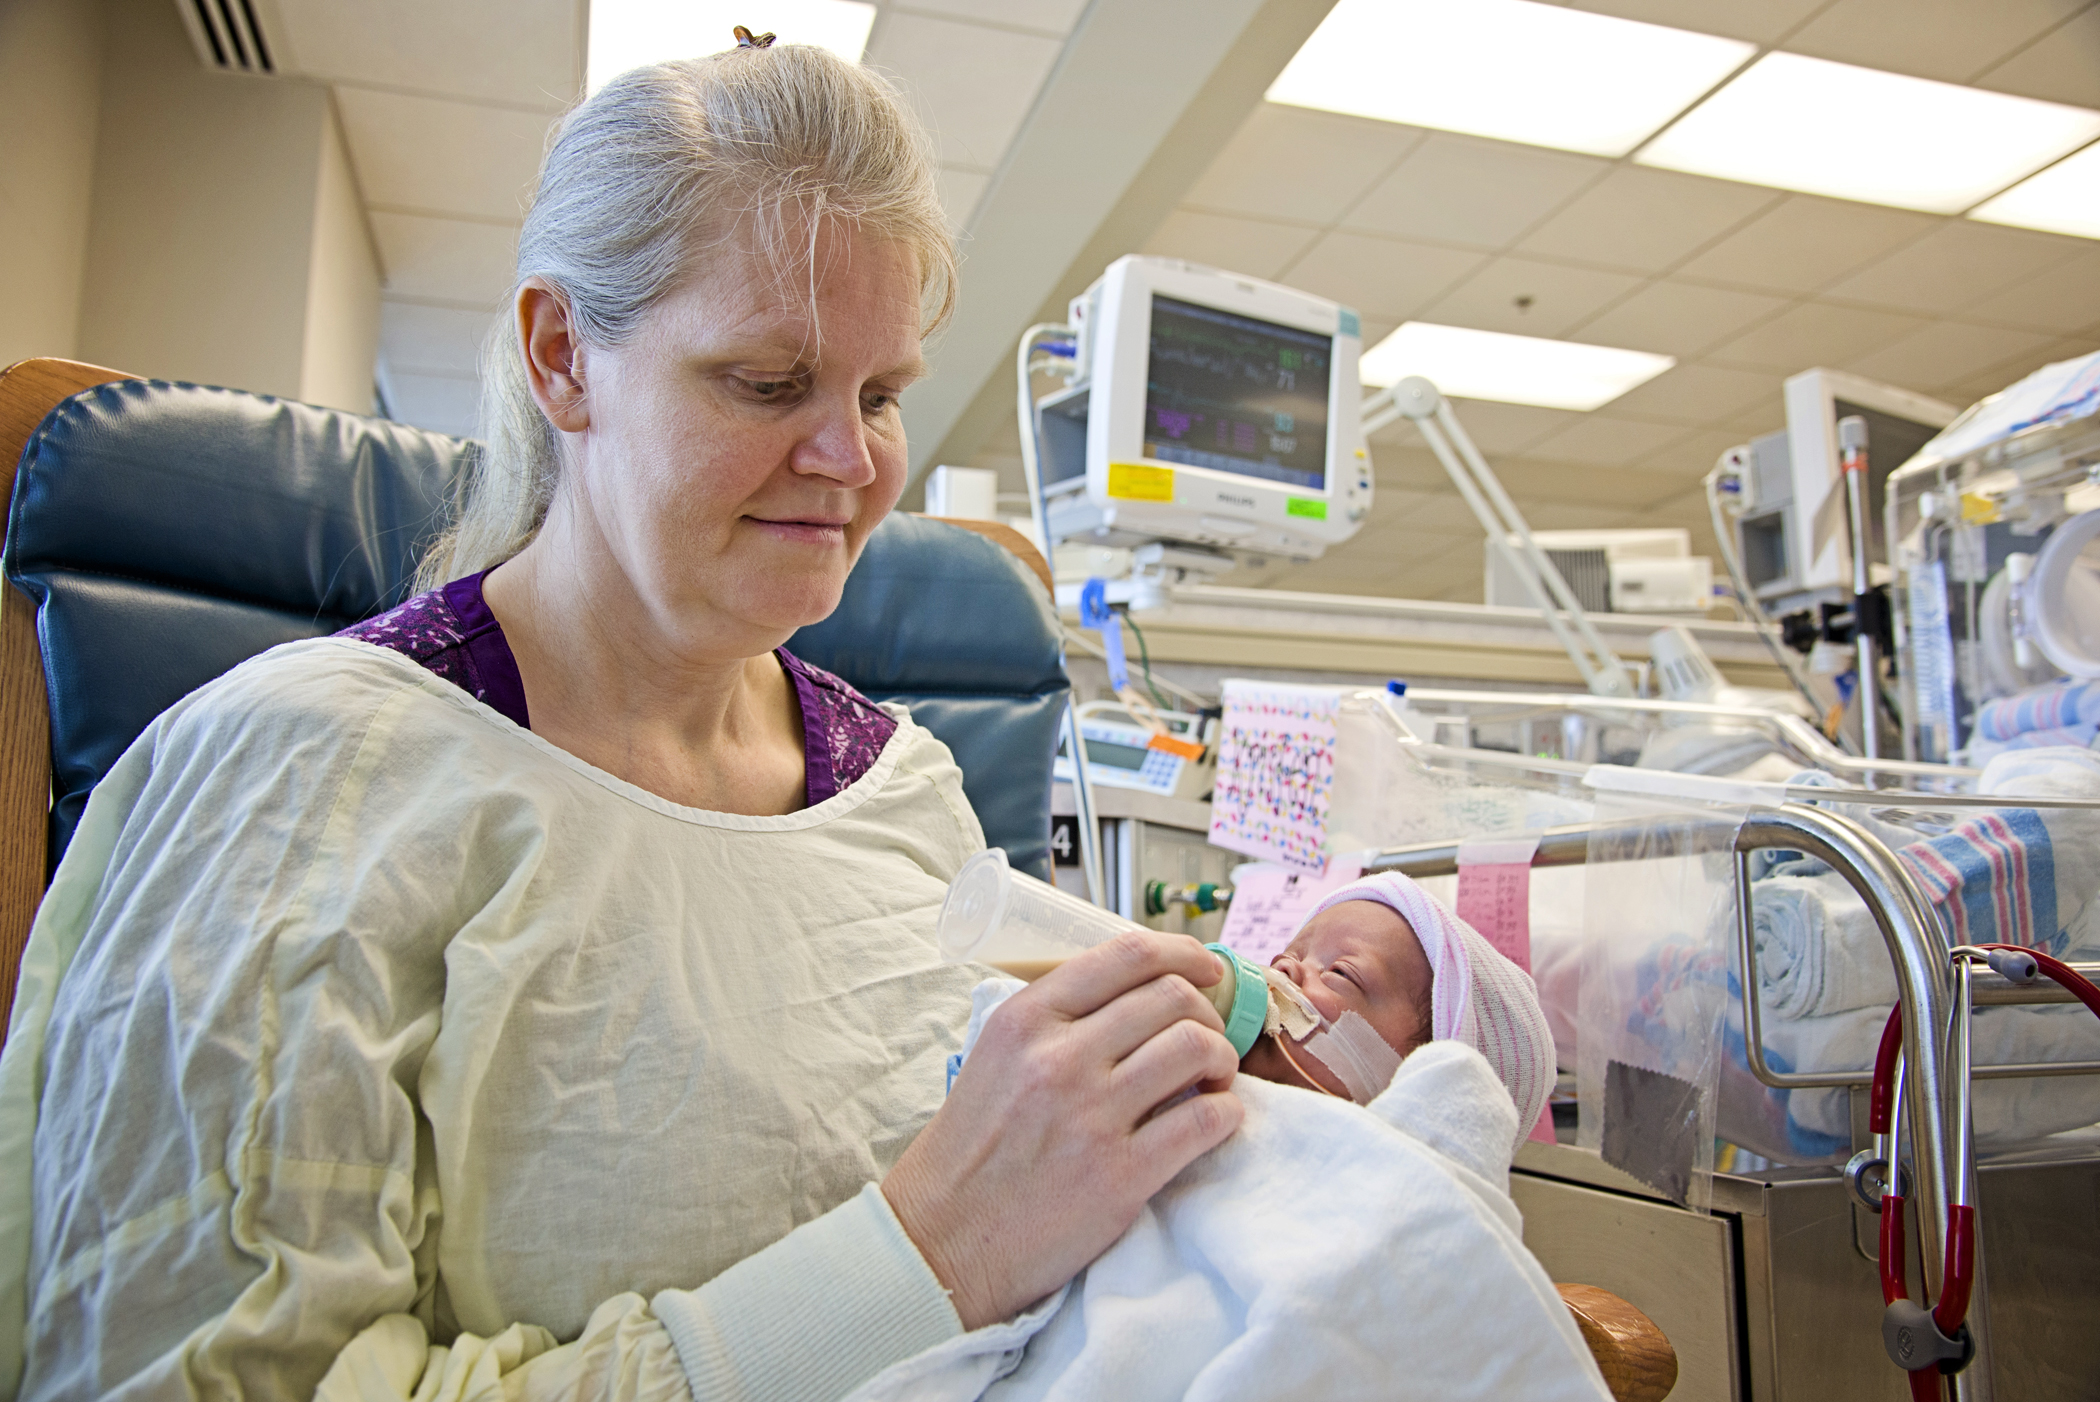 Kimberly Fugate gives Kristen, one of her four identical daughters, her first bottle in the Neonatal Intensive Care Unit at the University of Mississippi Medical Center.